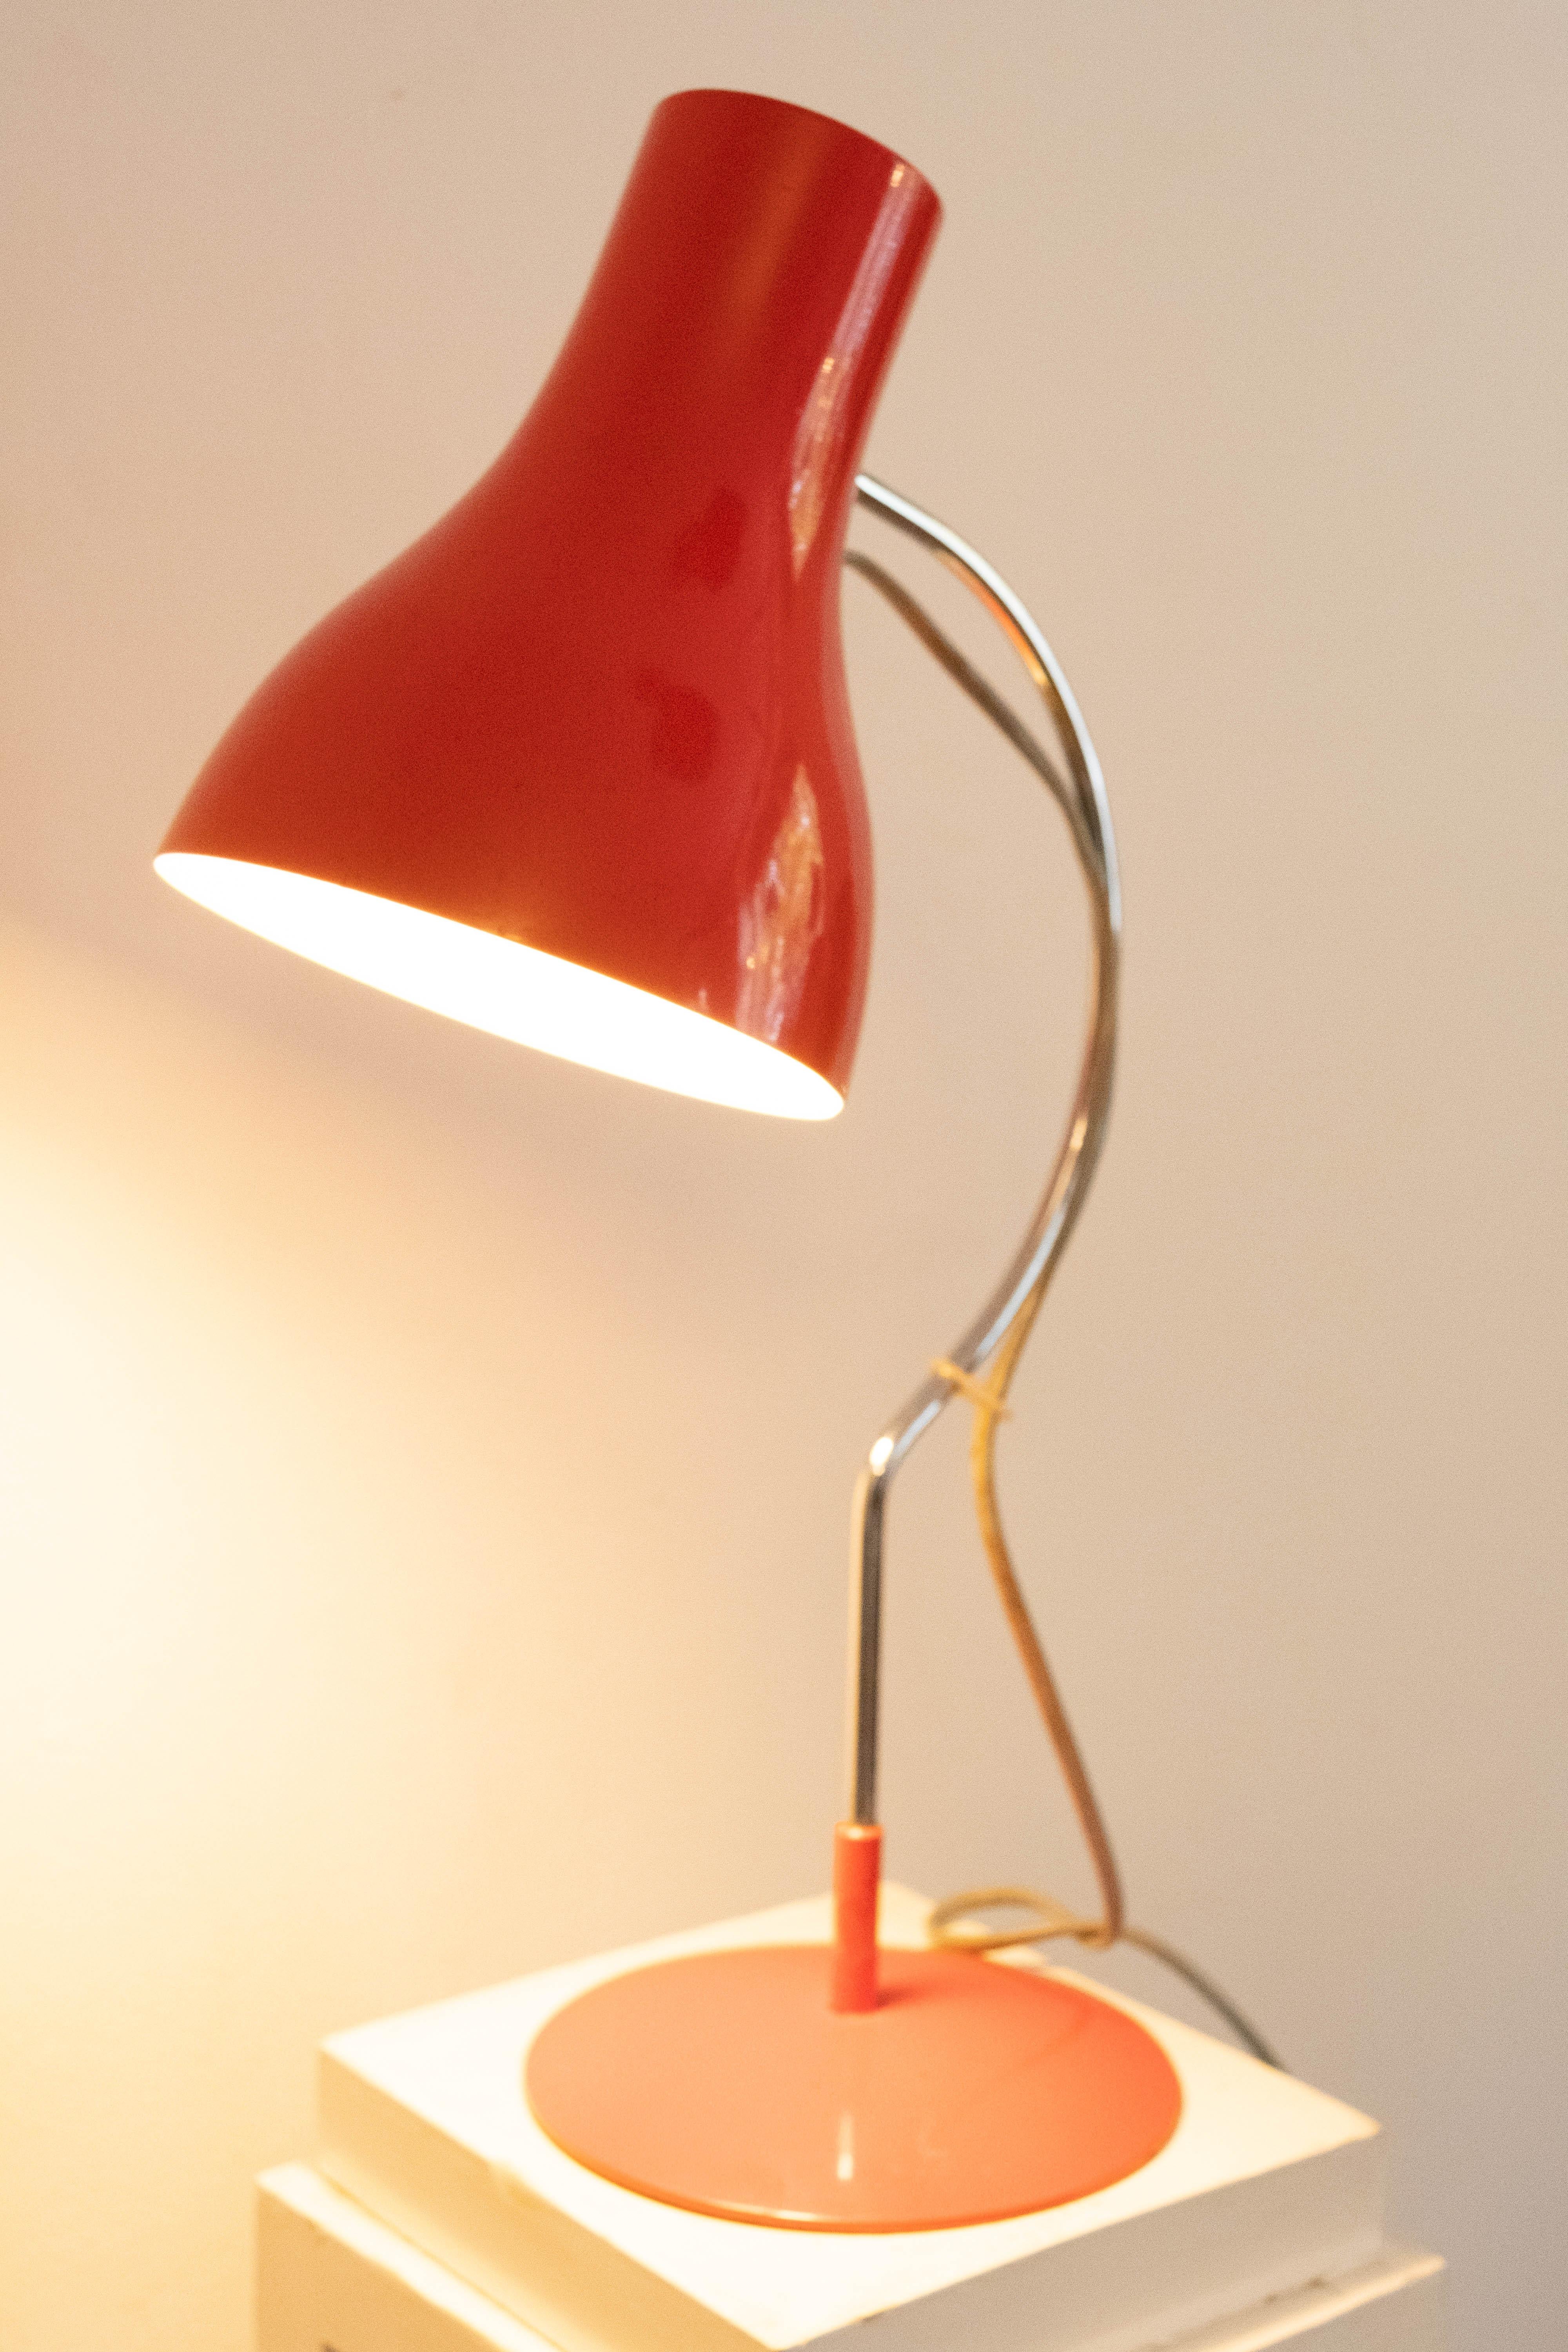 Mid-Century Modern Midcentury Red Table Lamp from Chech Designer Josef Hurka, 1970s